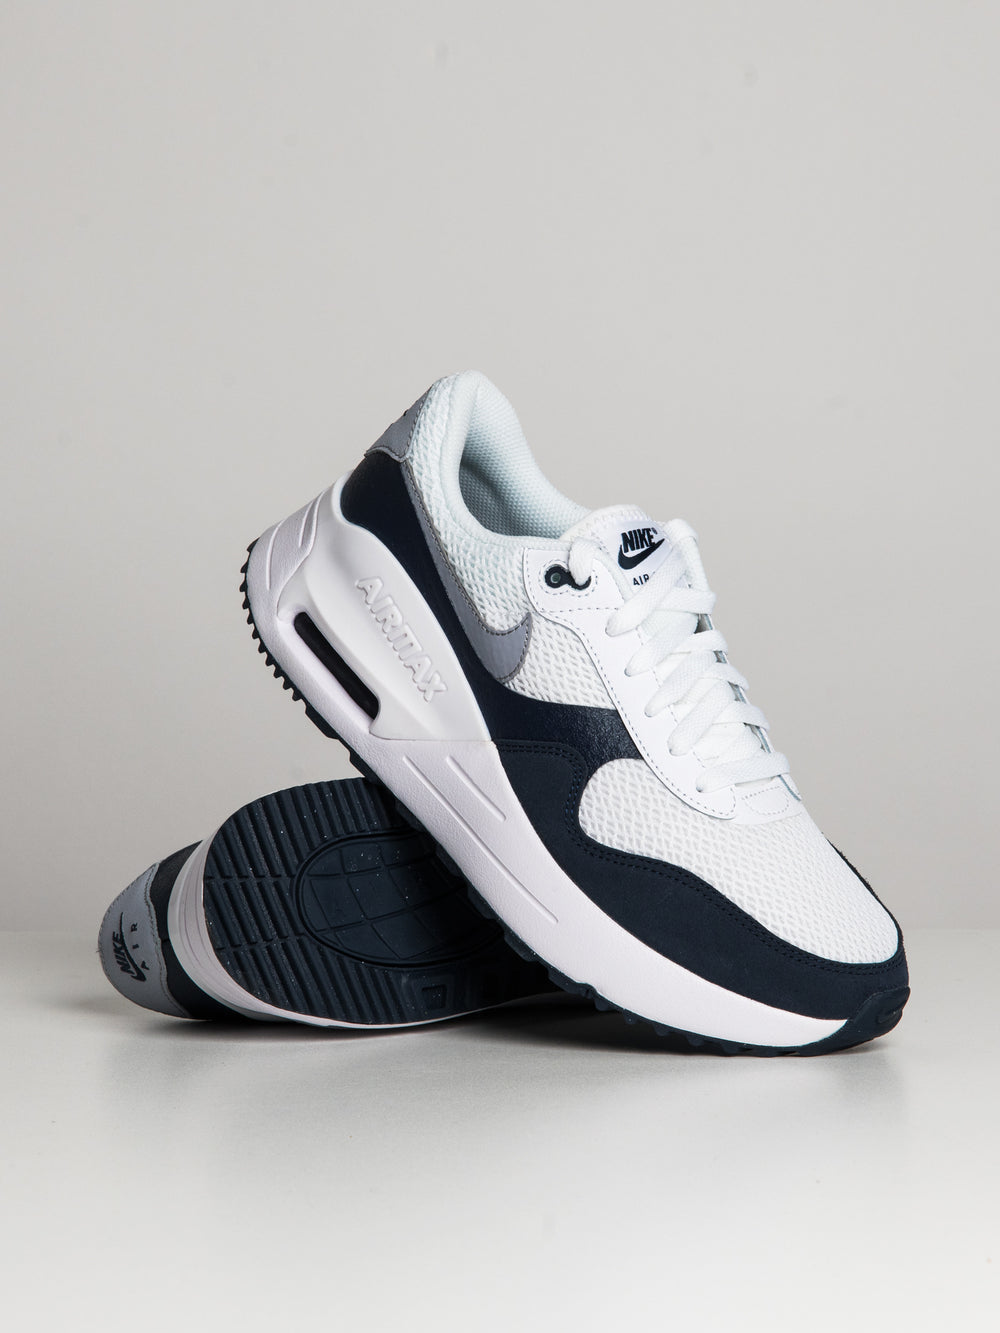 MENS NIKE NK AIR MAX SYSTEM - CLEARANCE